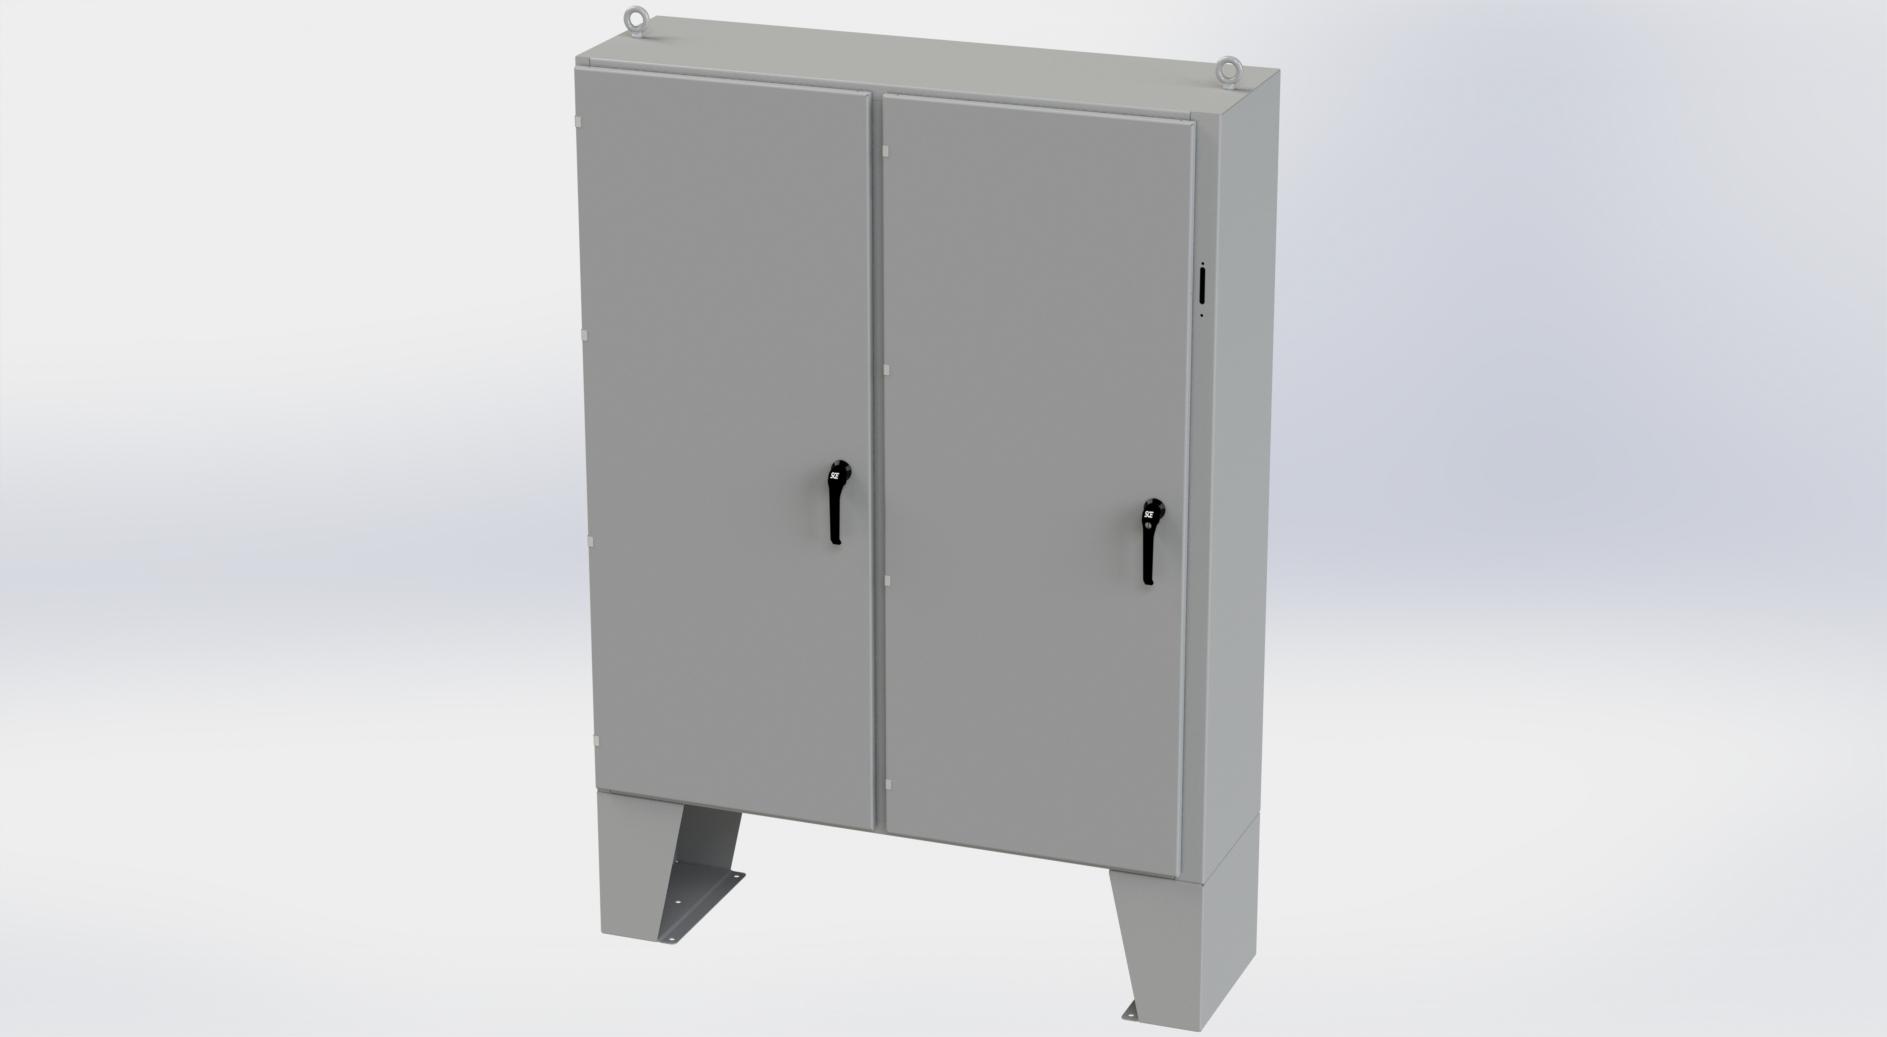 Saginaw Control SCE-72XEL6118LP 2DR XEL Enclosure, Height:72.00", Width:61.00", Depth:18.00", ANSI-61 gray powder coating inside and out. Optional sub-panels are powder coated white.